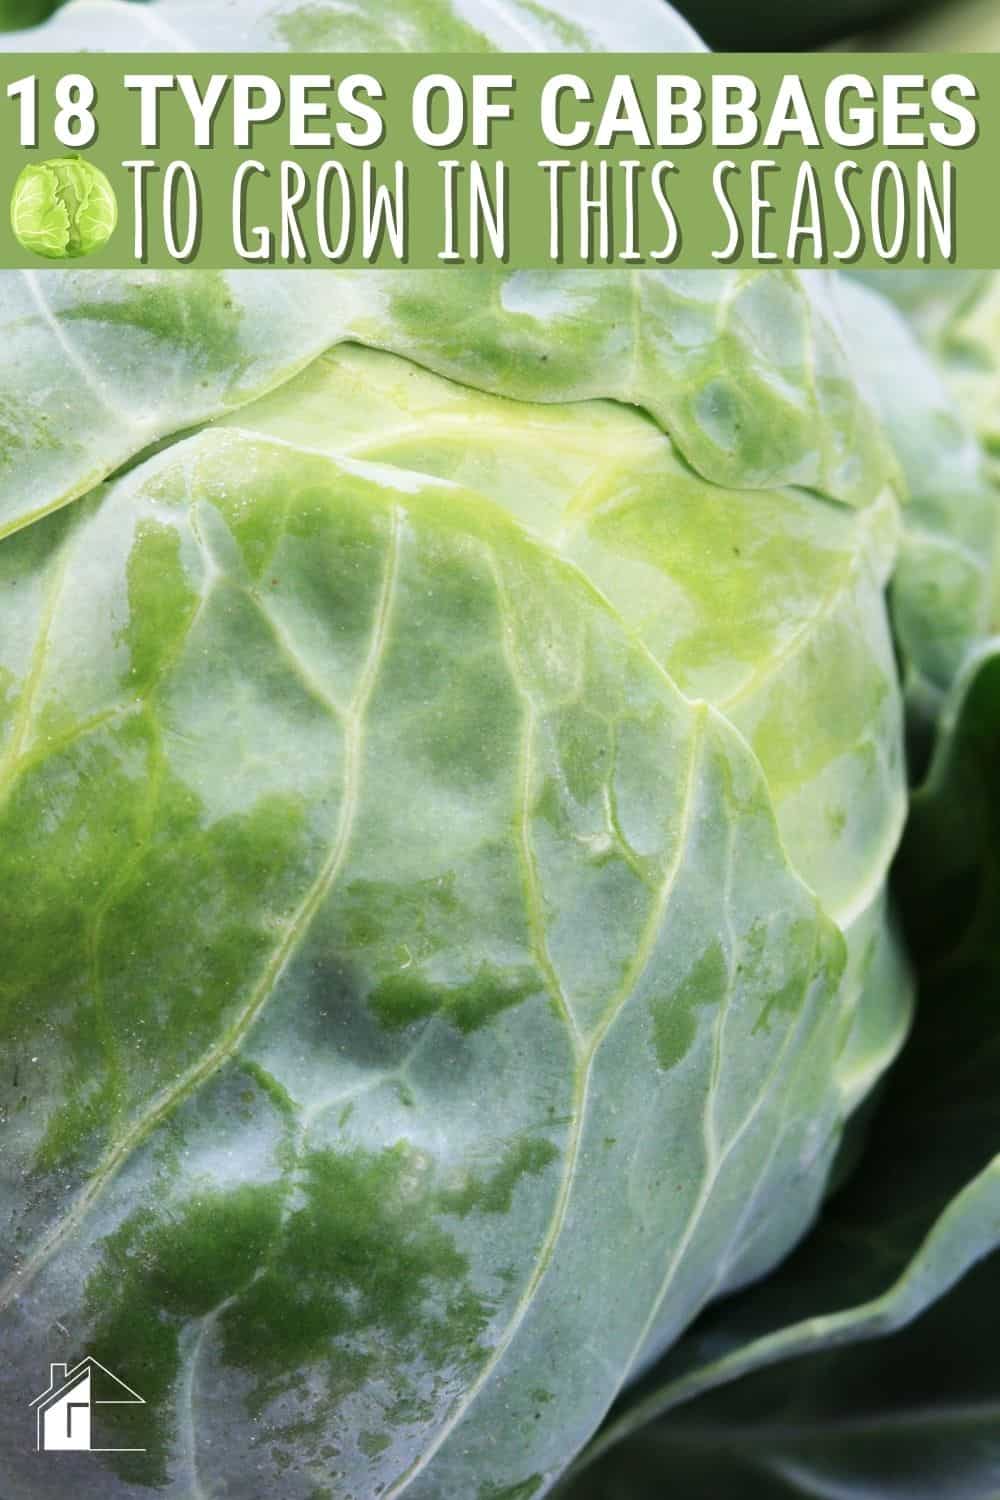 There are so many types of cabbages with different colors, shapes, and textures. Growing cabbage can also be easy and enjoyable. via @mystayathome